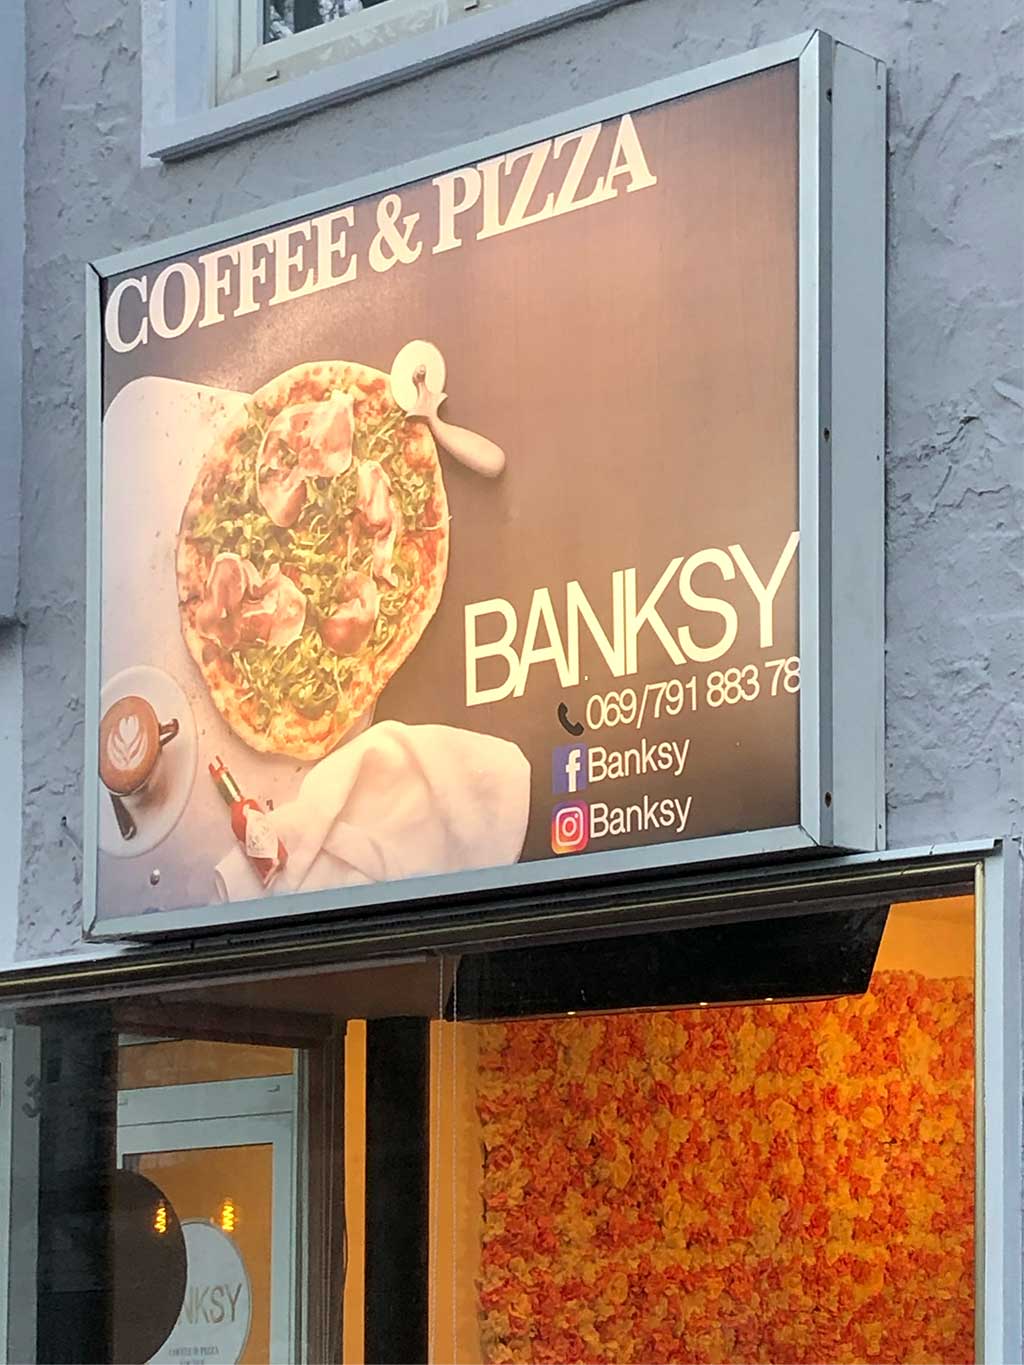 Coffee & Pizza Banksy